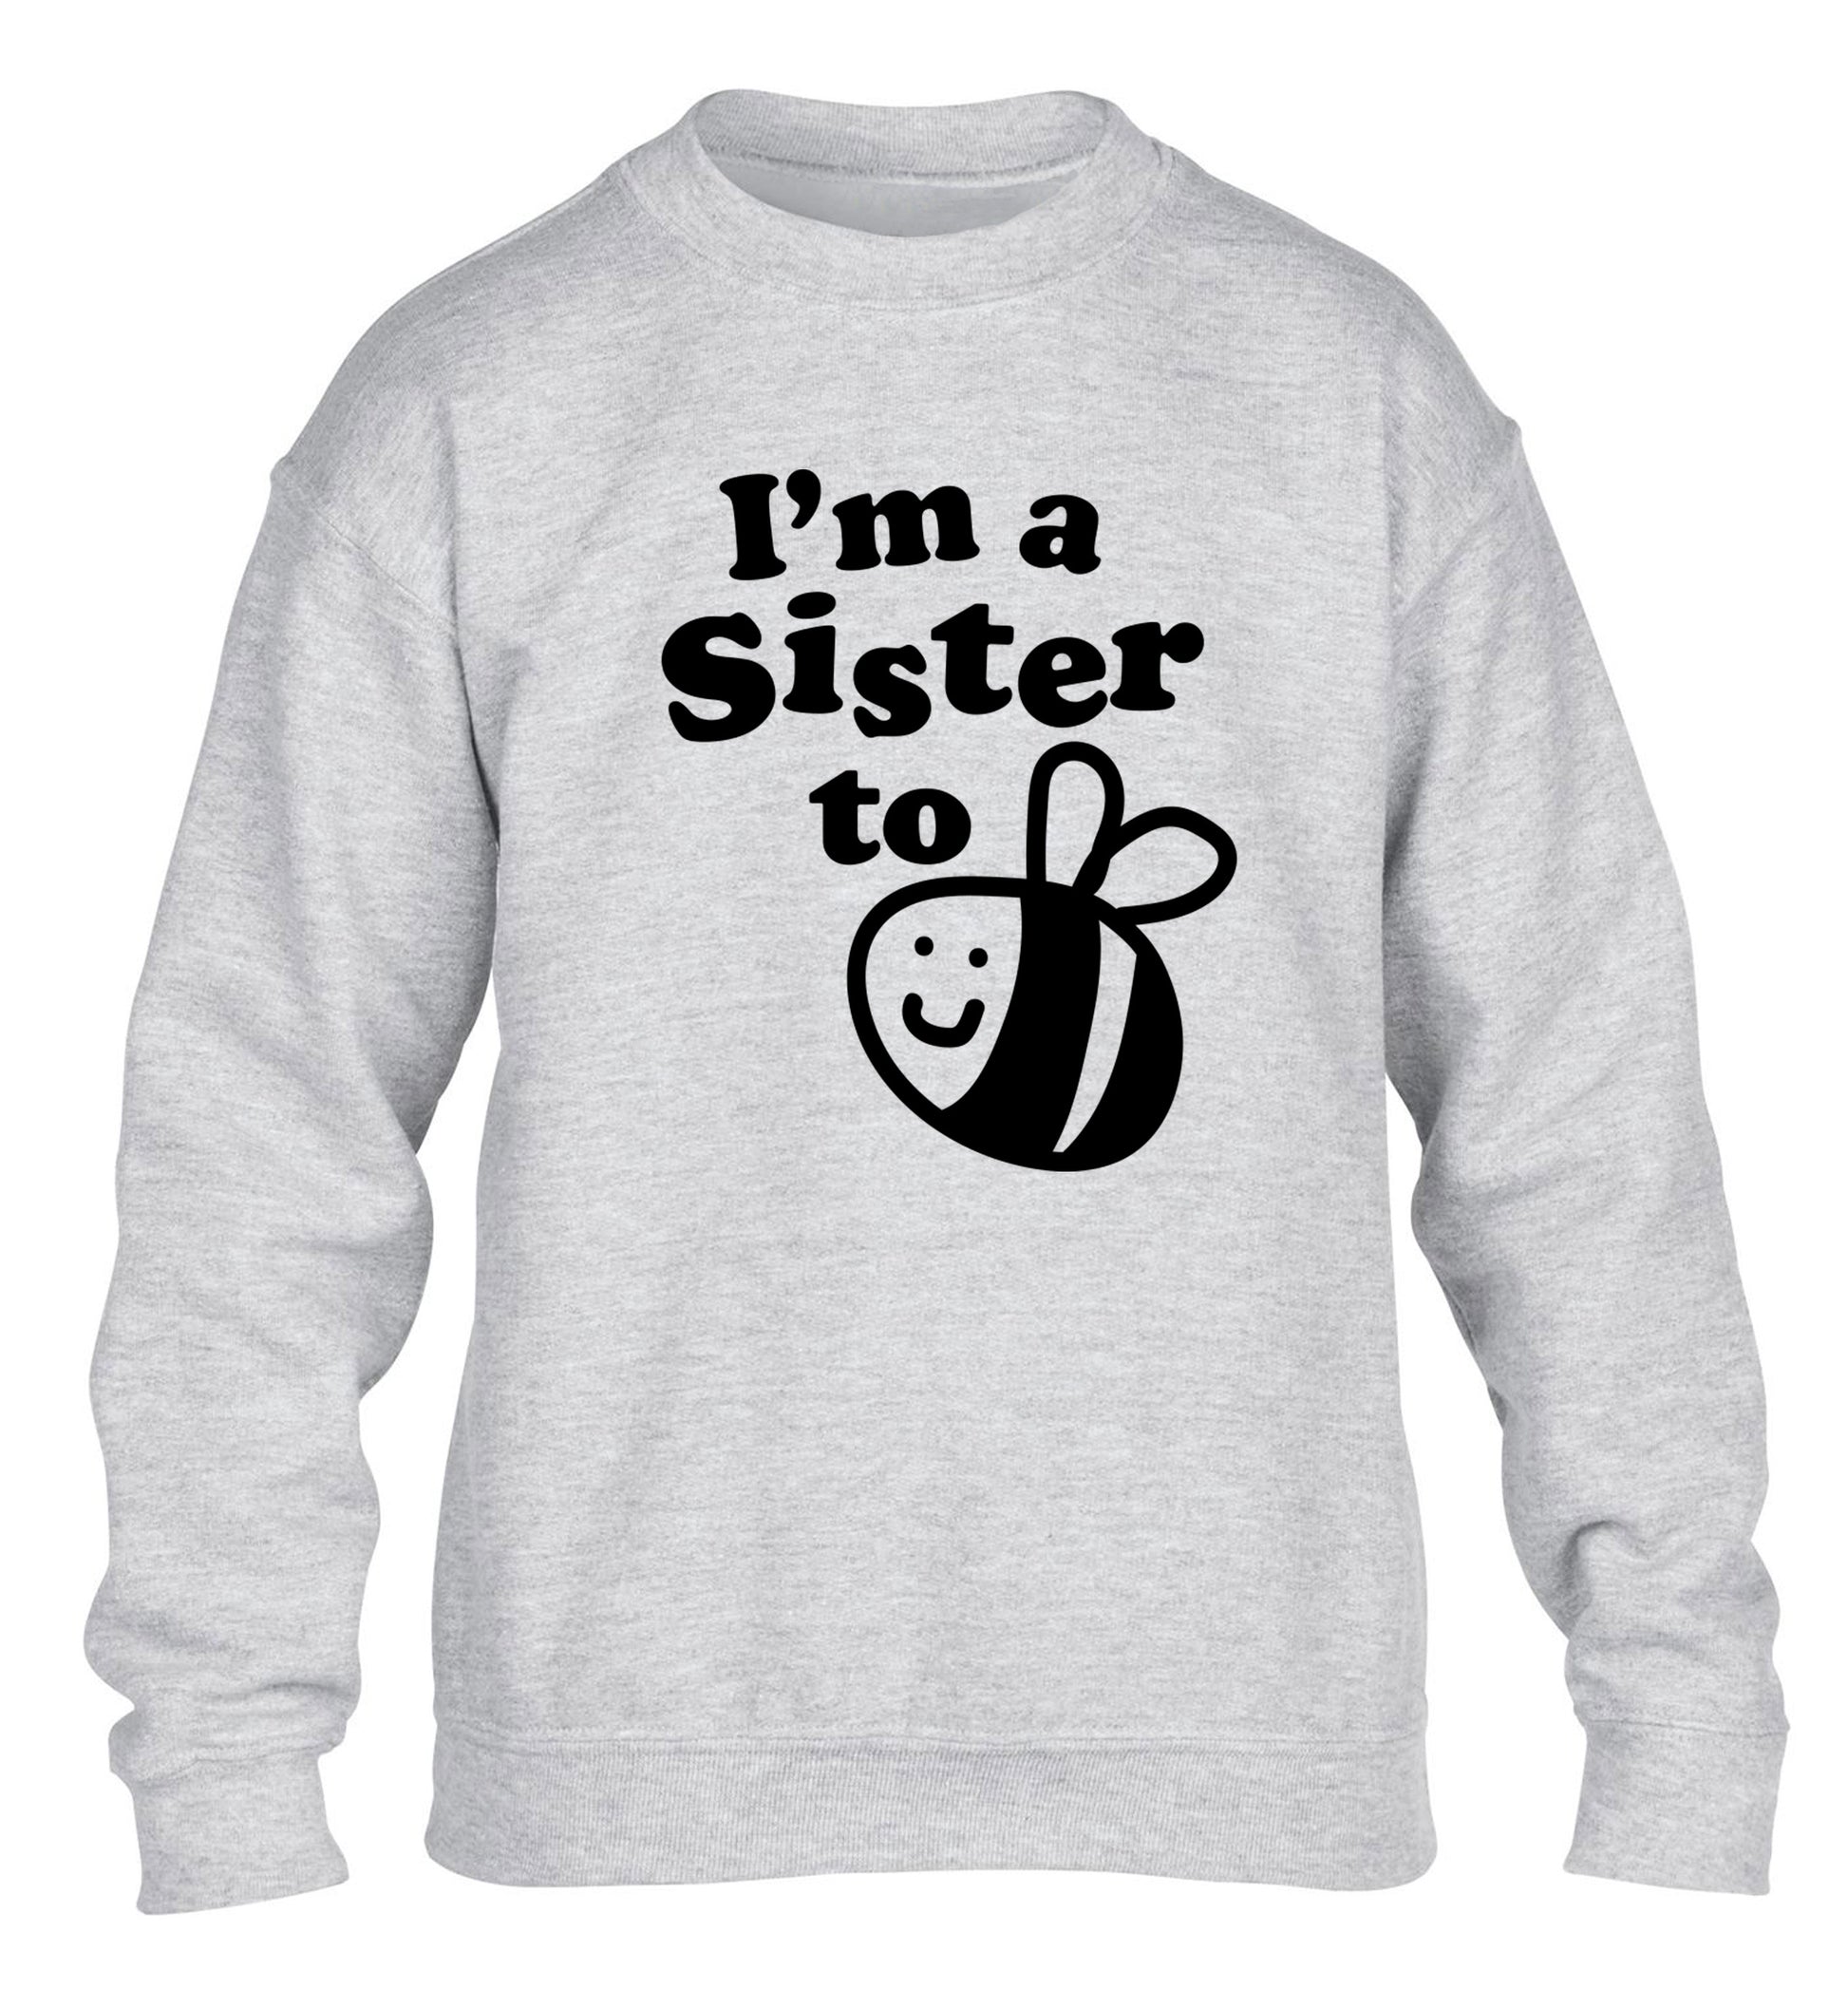 I'm a sister to be children's grey sweater 12-14 Years